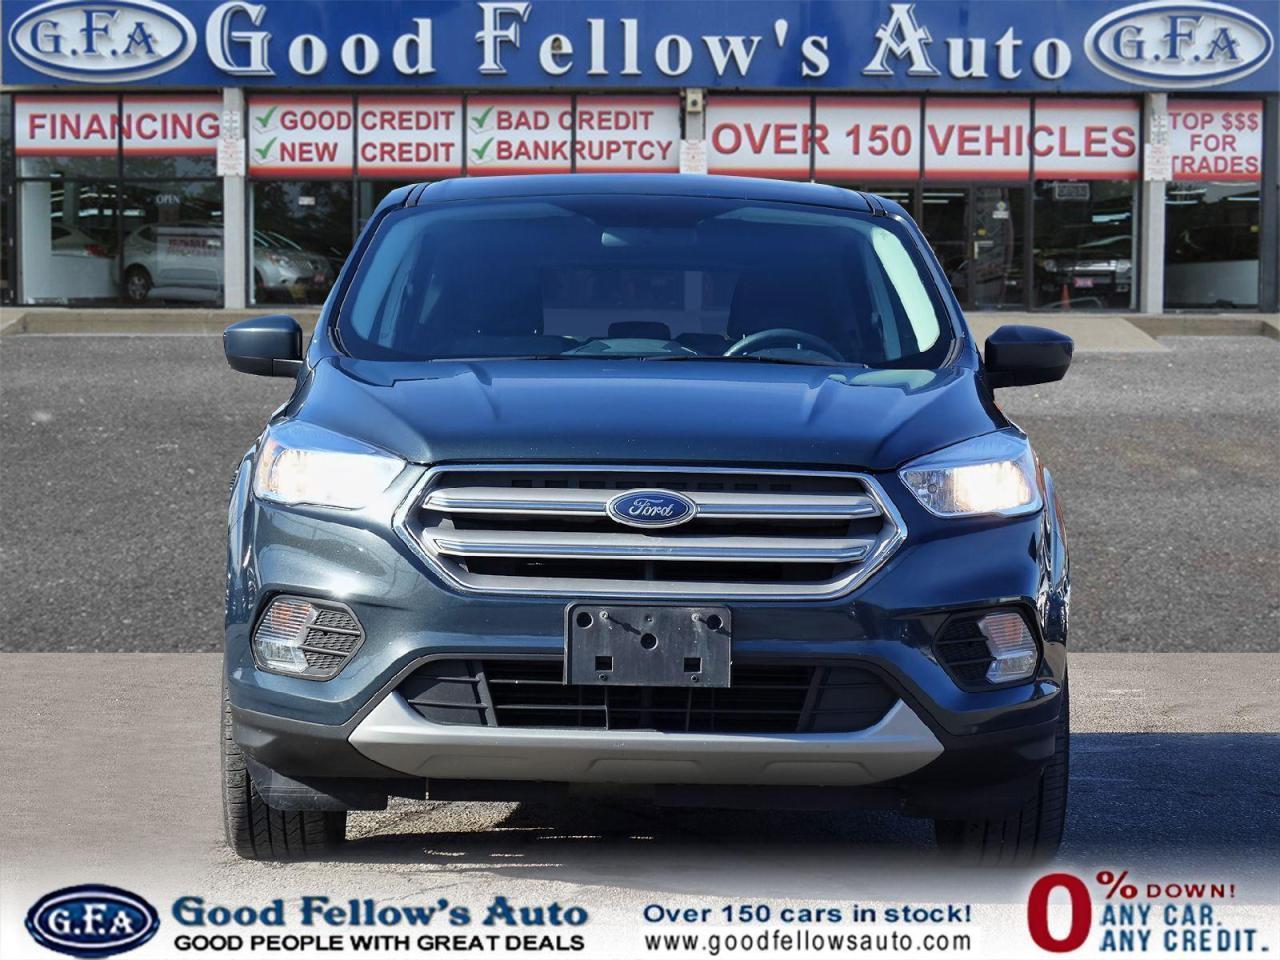 2019 Ford Escape SE MODEL, ECOBOOST, FWD, REARVIEW CAMERA, HEATED S - Photo #2